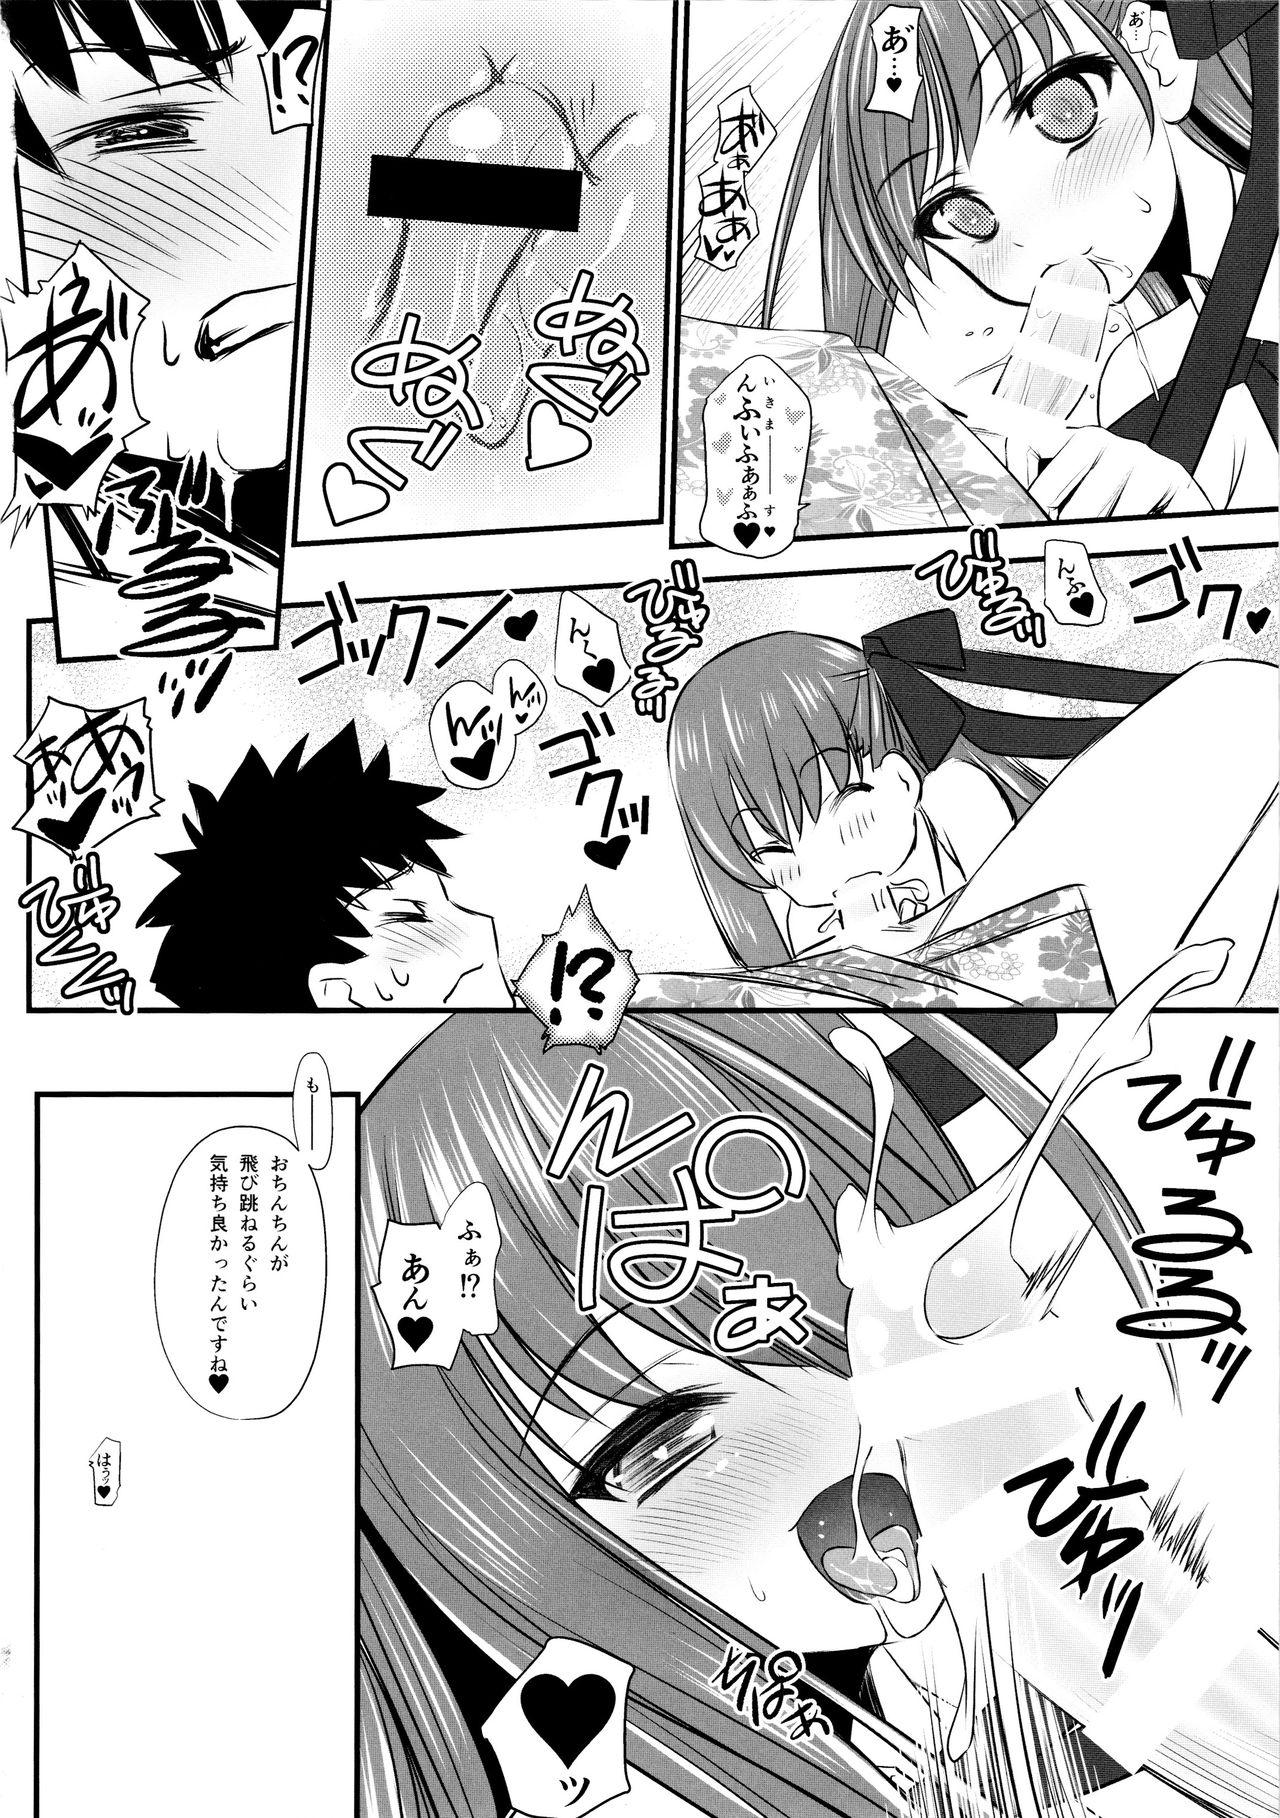 Ginger (C96) [Yakan Honpo (Inoue Tommy)] Queen [Kyuuin] BB-chan (Fate/Grand Order) - Fate grand order Pay - Page 6